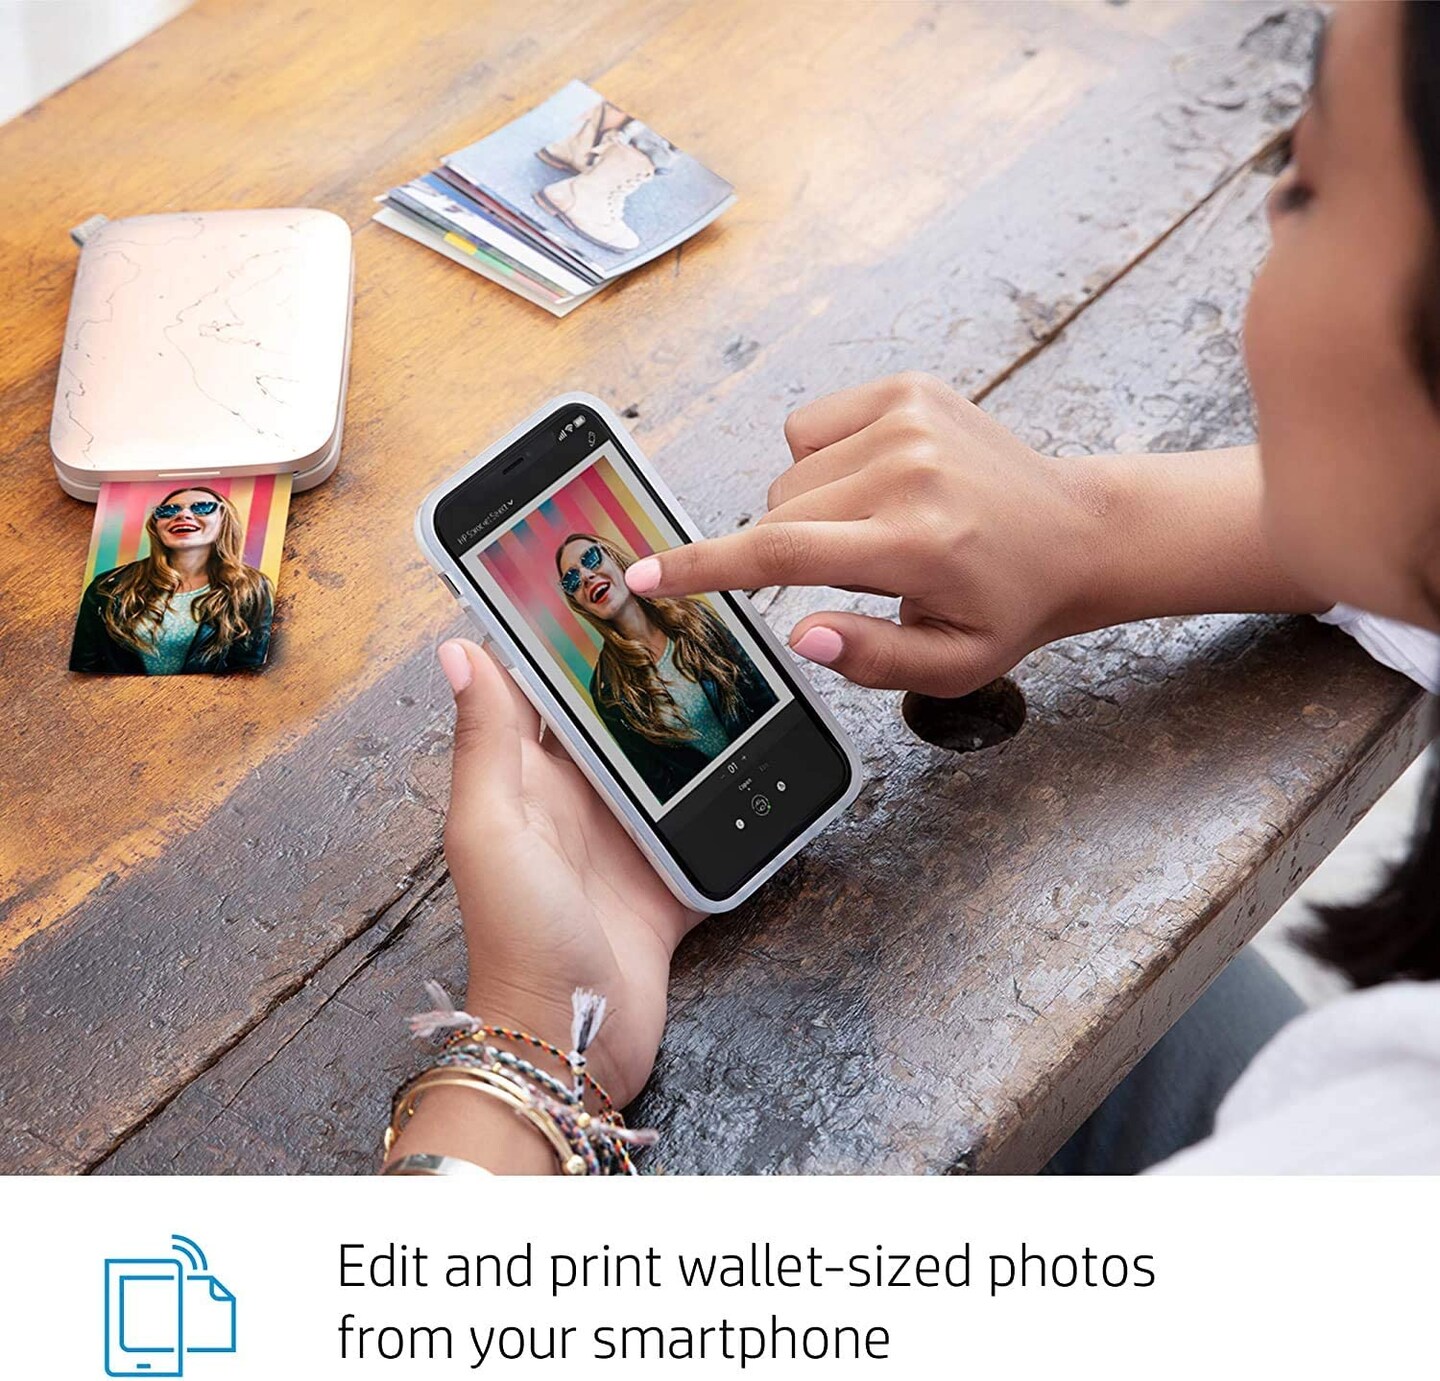 HP Sprocket Portable Printer, Zink Sticky Paper 2.3x3.4 Instant Photo  Printer for iOS & Android